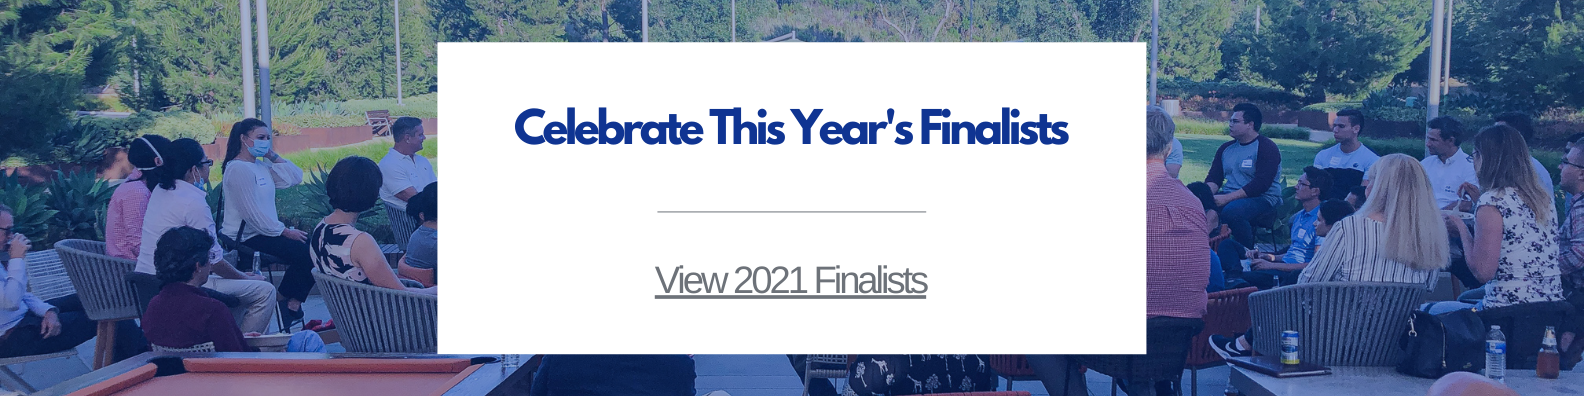 Celebrate this years finalists view 2021 finalists